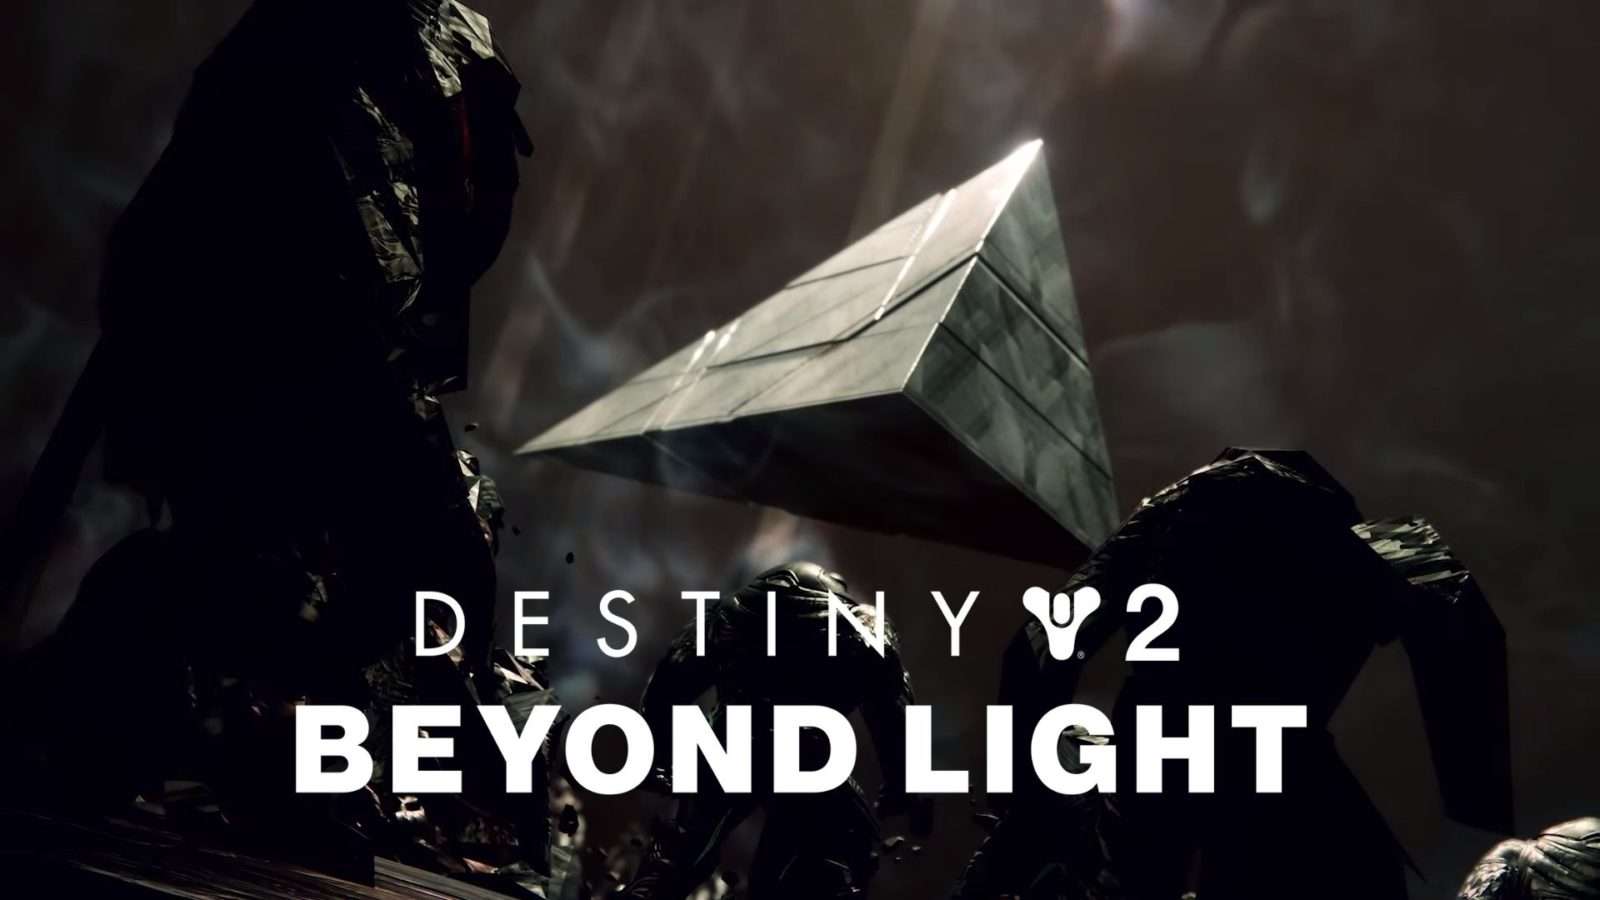 entropic shard in destiny 2 beyond light featured image